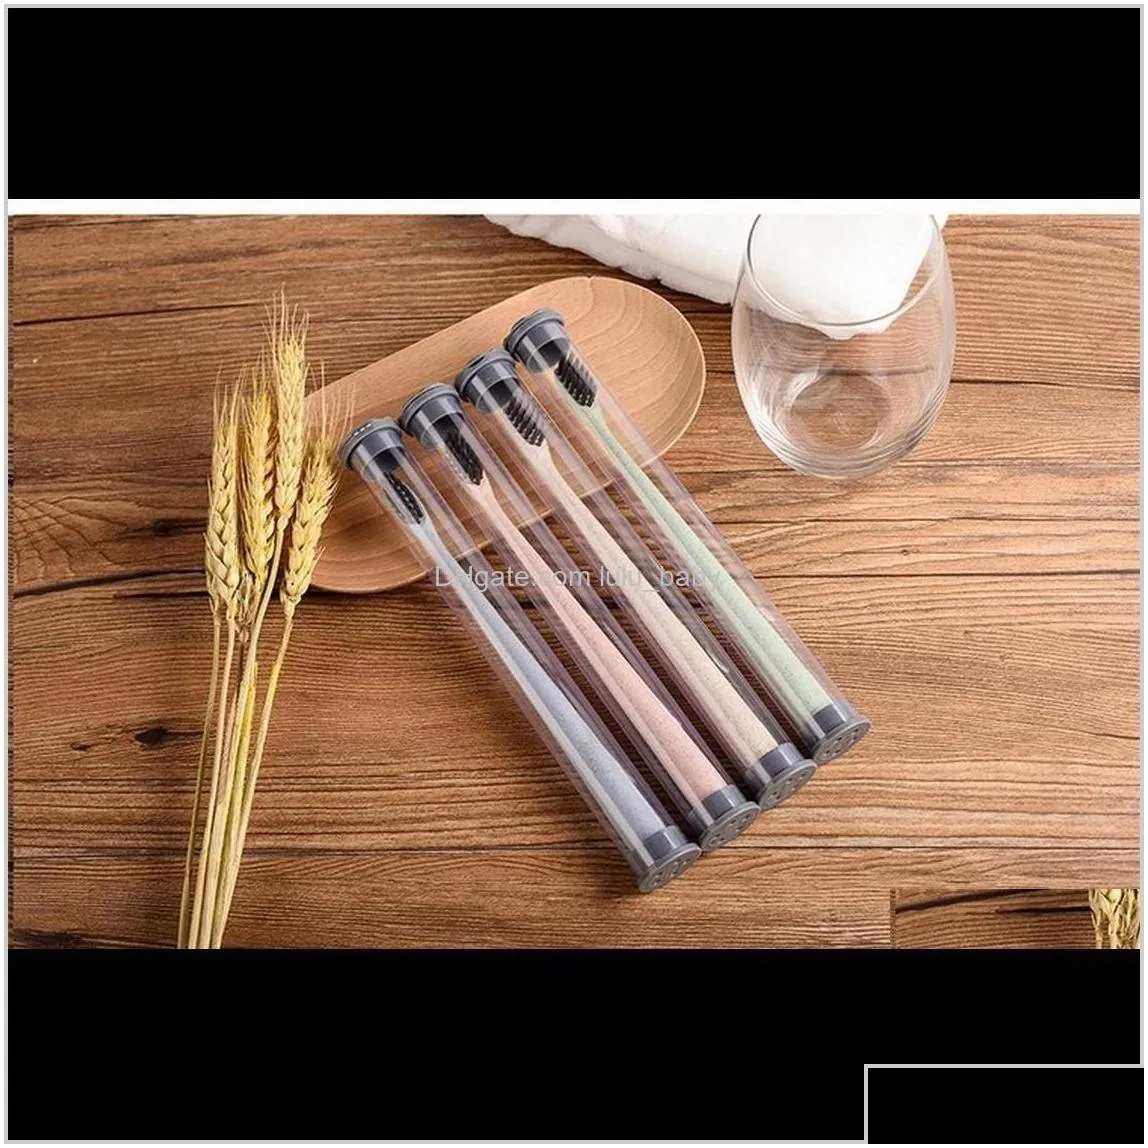 Wheat Straw Bamboo Charcoal Soft Bristled Adult Portable Oral Cleaning And Care Explosive Toothbrush Kwwnz